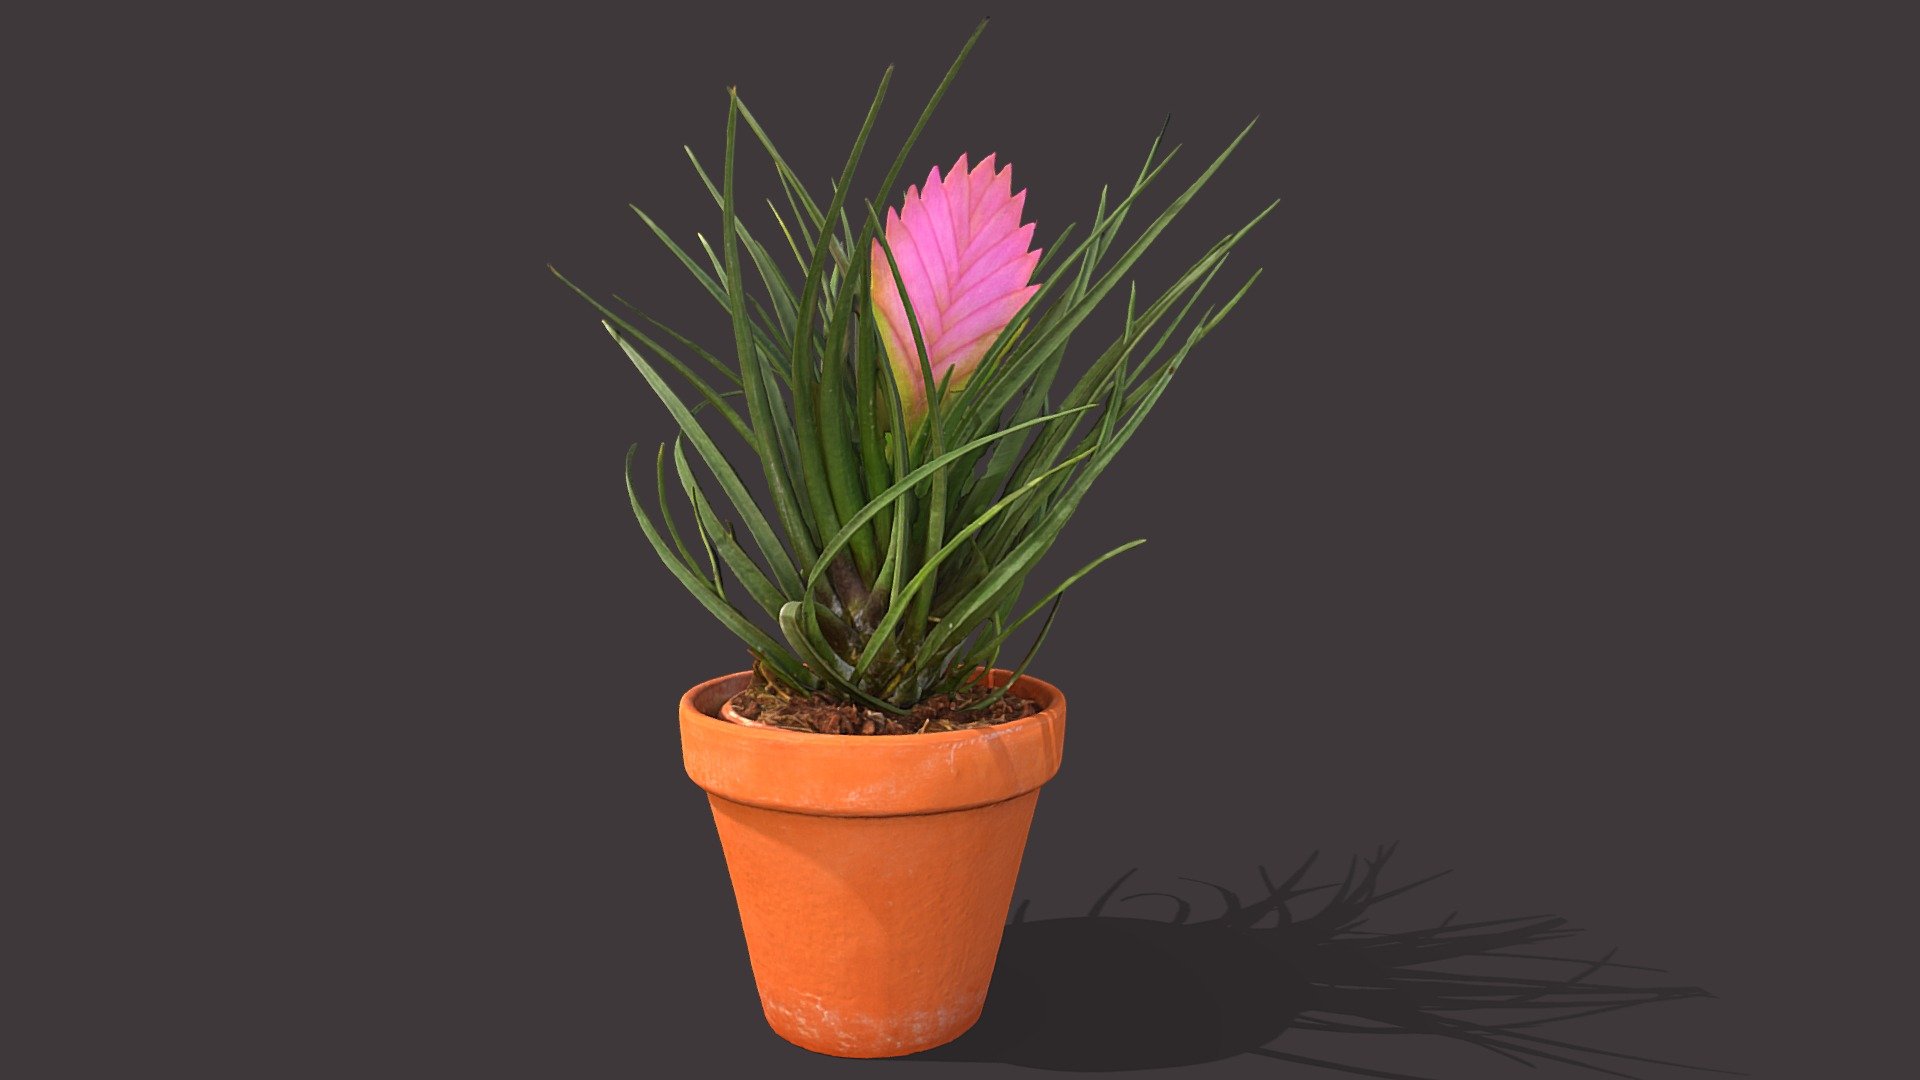 A highpoly model of a pink Bromelia.

The model includes 8k diffuse map, 4k occlusion map and additional 50k model of the plant with 8k diffuse, 4k normal map and 4k occlusion map.

Photos taken with A7Riv + 90mm Sony macro + 3 x D5300 with various lenses.

Processed with Metashape + Blender 3d model